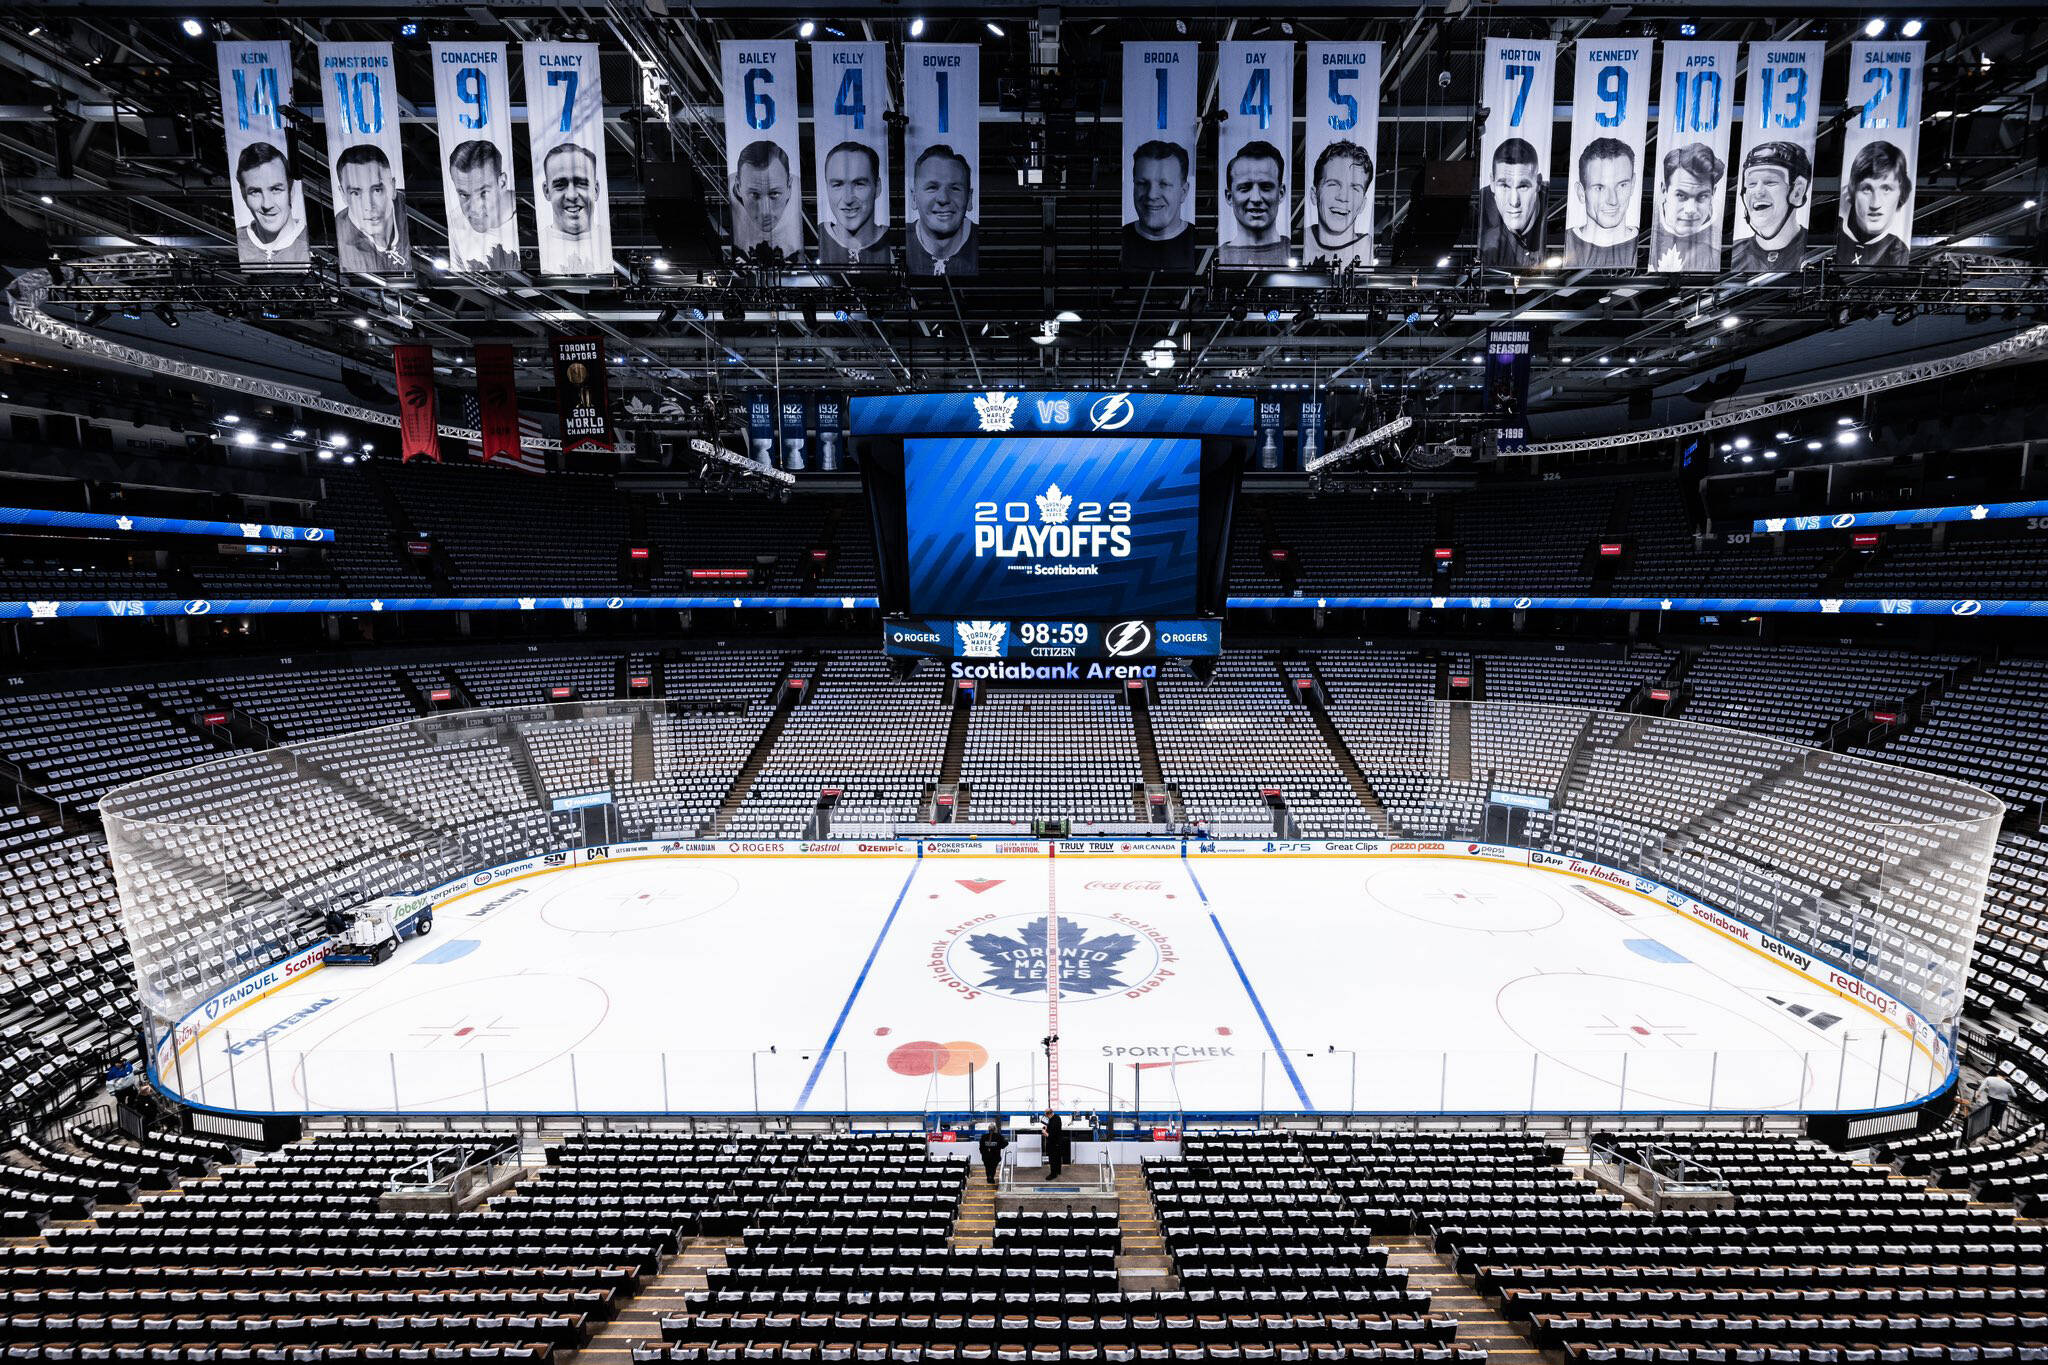 Toronto Maple Leafs booed off the ice by home fans in blowout playoff loss